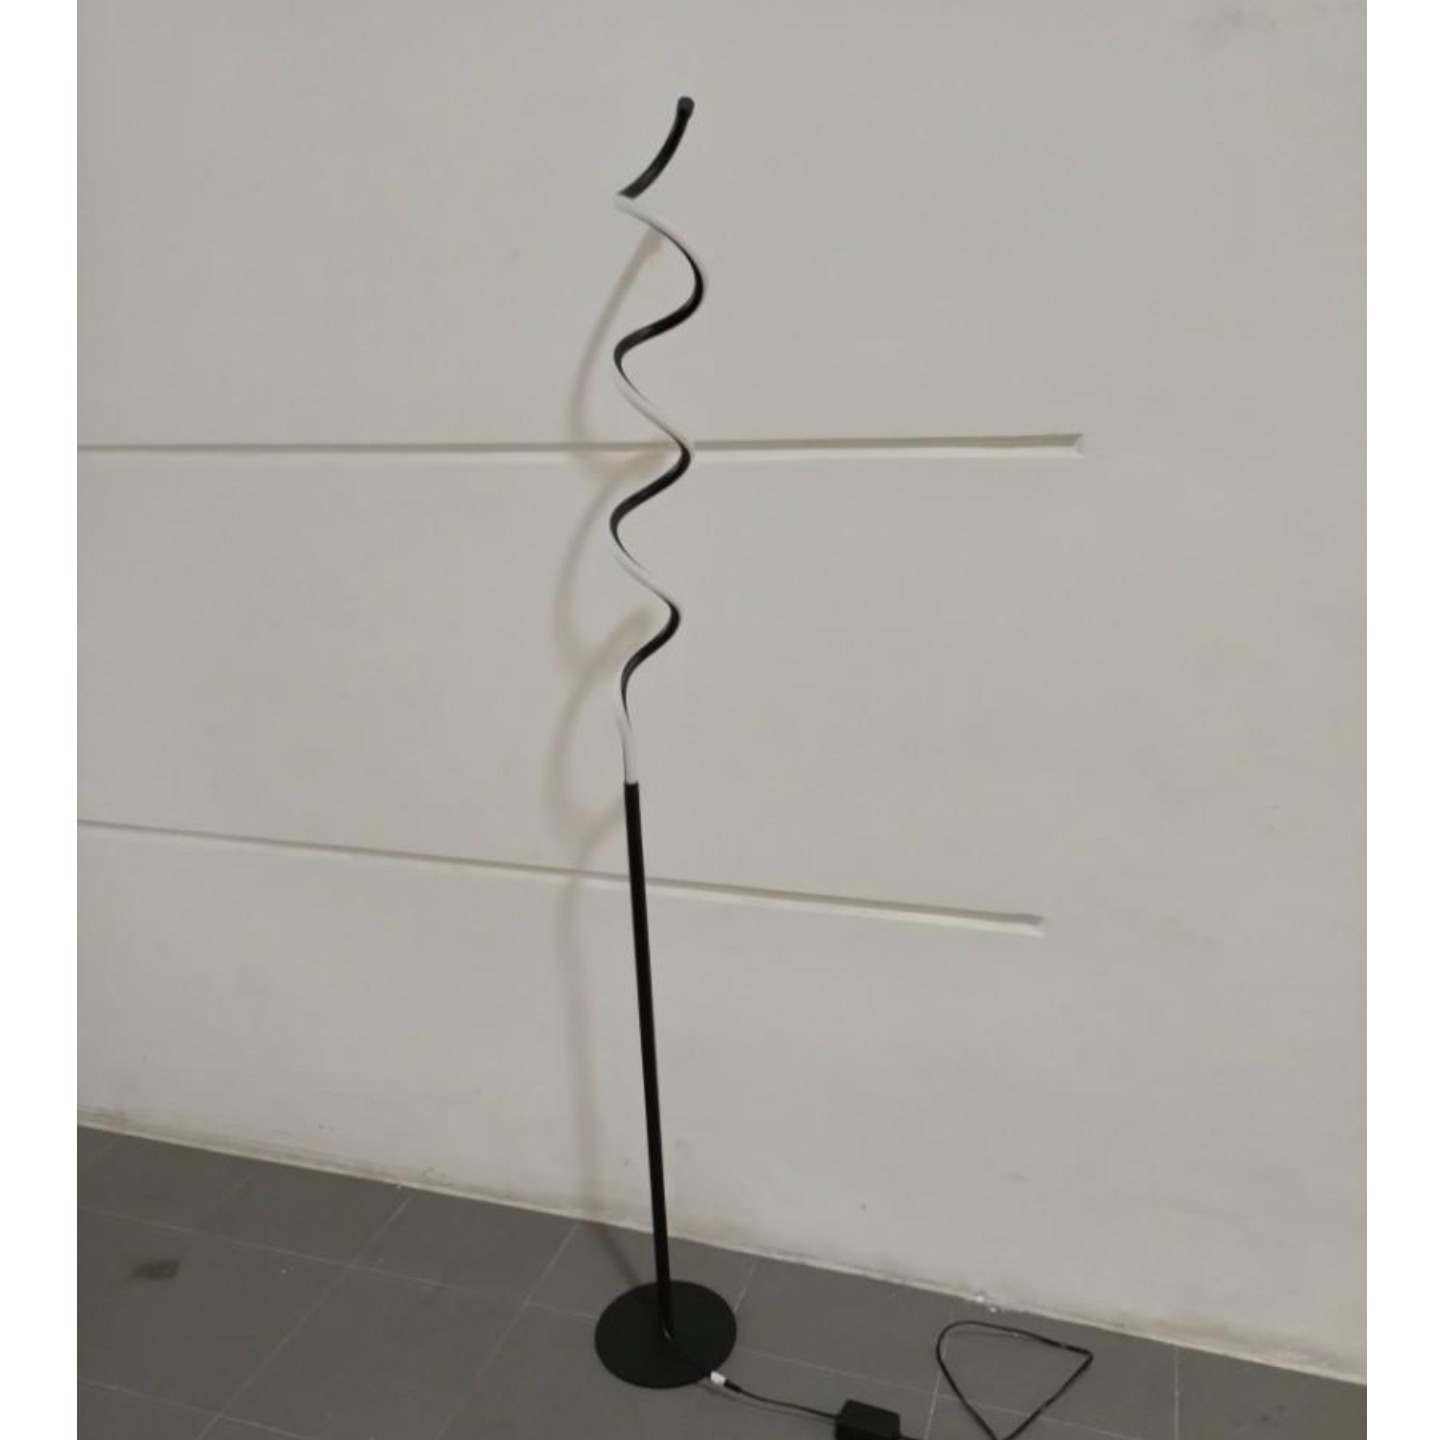 SAINT LED Floor Lamp with Remote Control